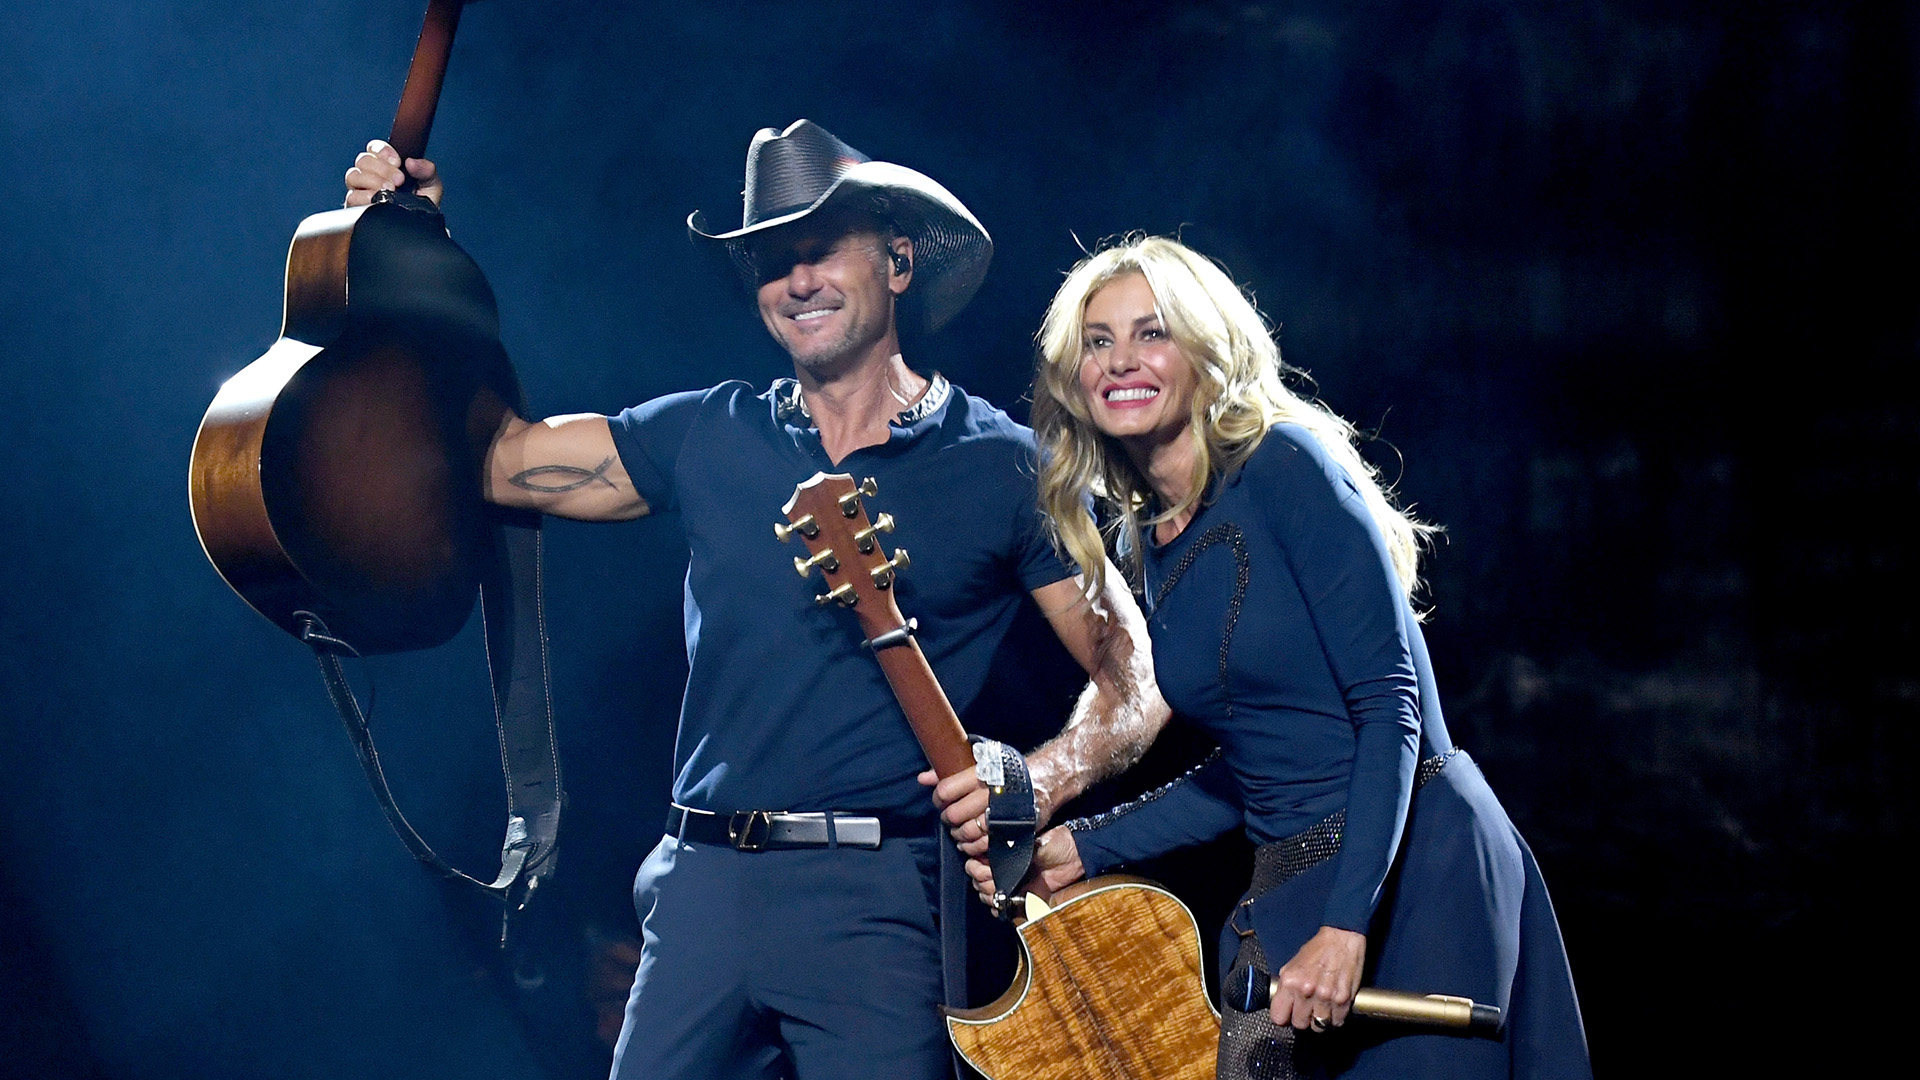 Tim McGraw (L) and Faith Hill perform onstage during the "Soul2Soul" World Tour at Staples Center on July 14, 2017 in Los Angeles, California.